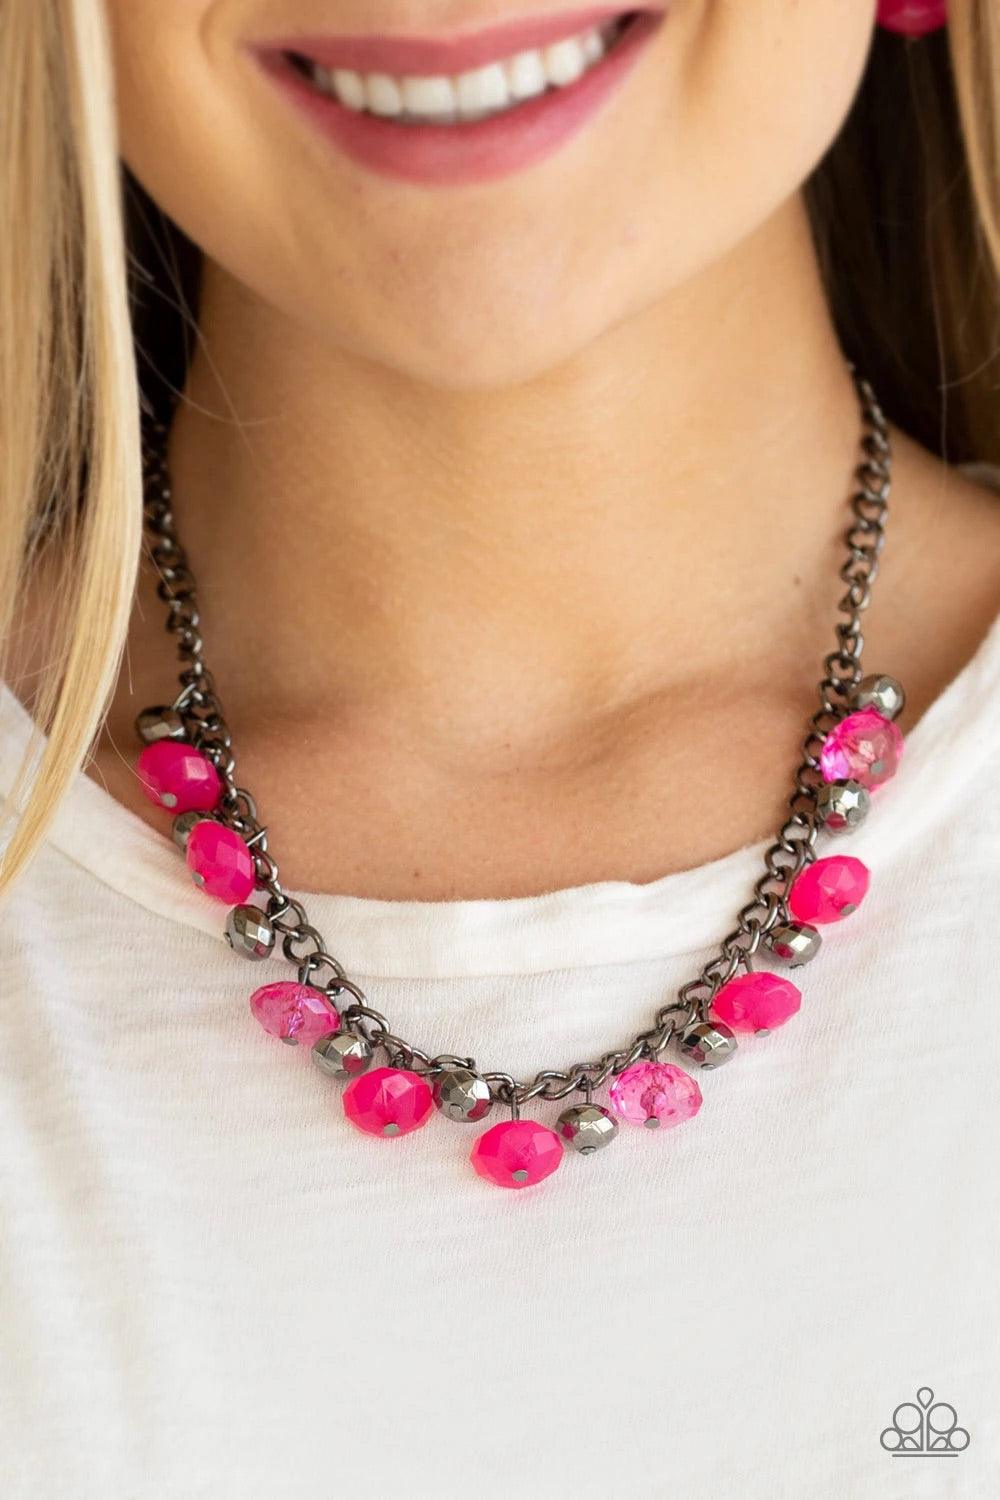 Paparazzi Accessories Runway Rebel - Pink Featuring cloudy and glassy finishes, faceted pink crystal-like beads swing from the bottom of a glistening gunmetal chain. Faceted gunmetal beads join the pink beading, creating a flirtatious fringe below the col